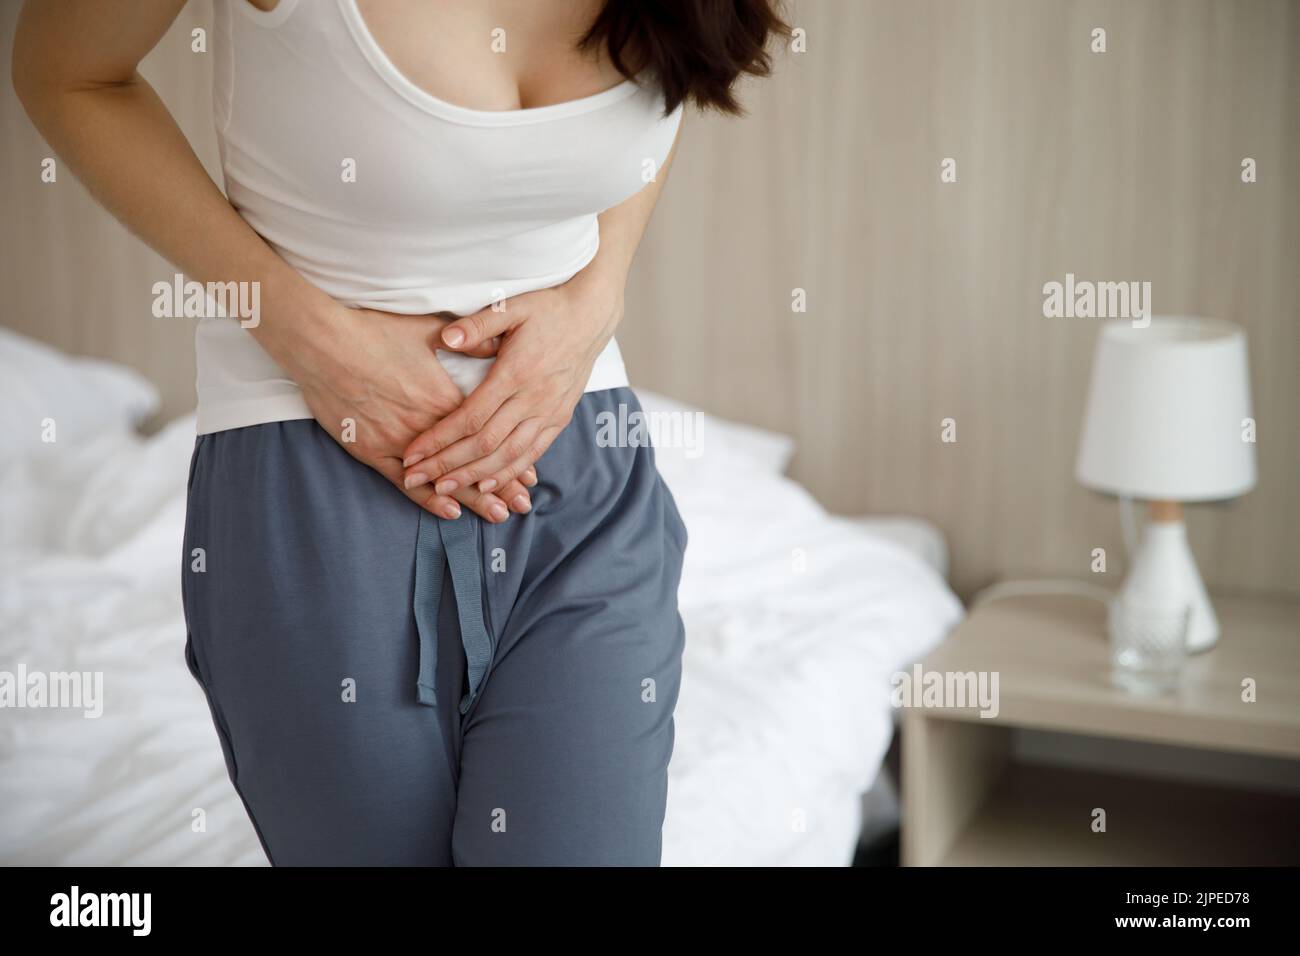 The woman is suffering from abdominal pain. Symptoms of cystitis. Stock Photo